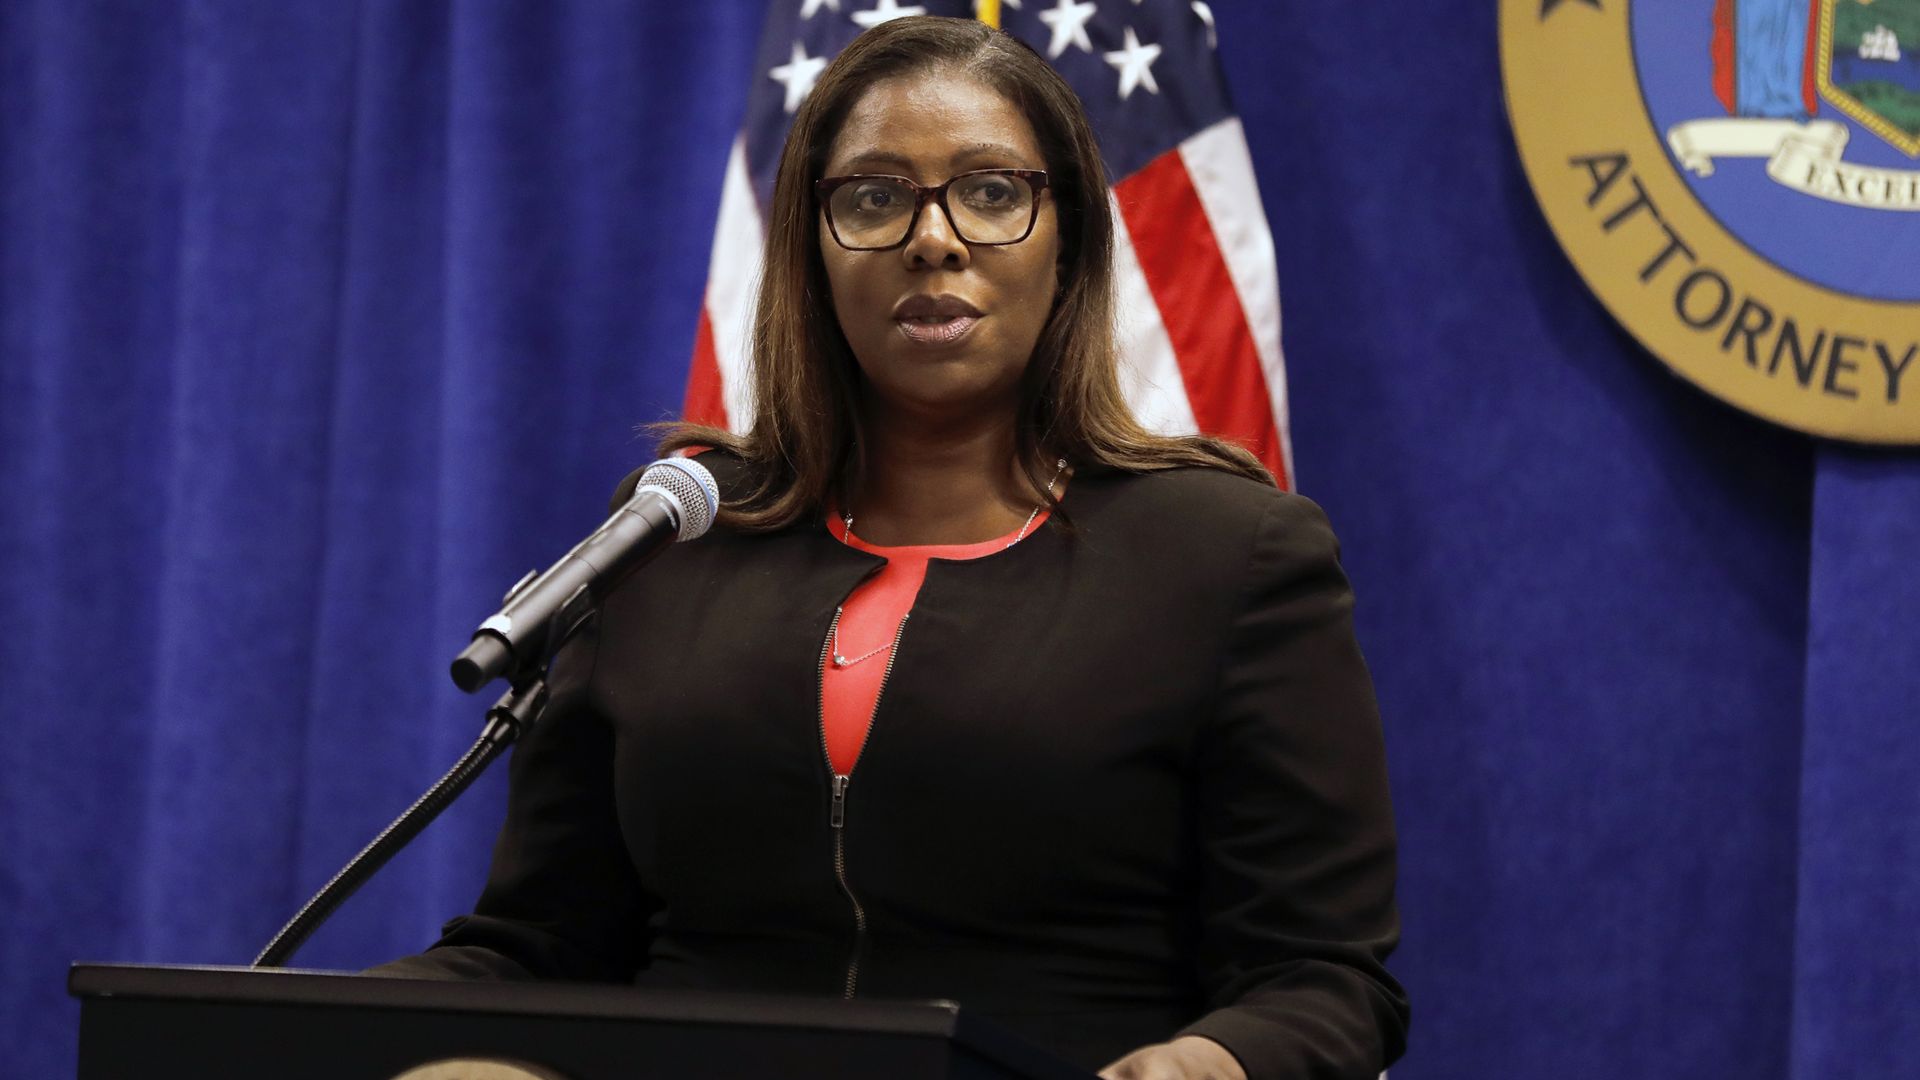 New York Attorney General Letitia James is seen speaking during a news conference.